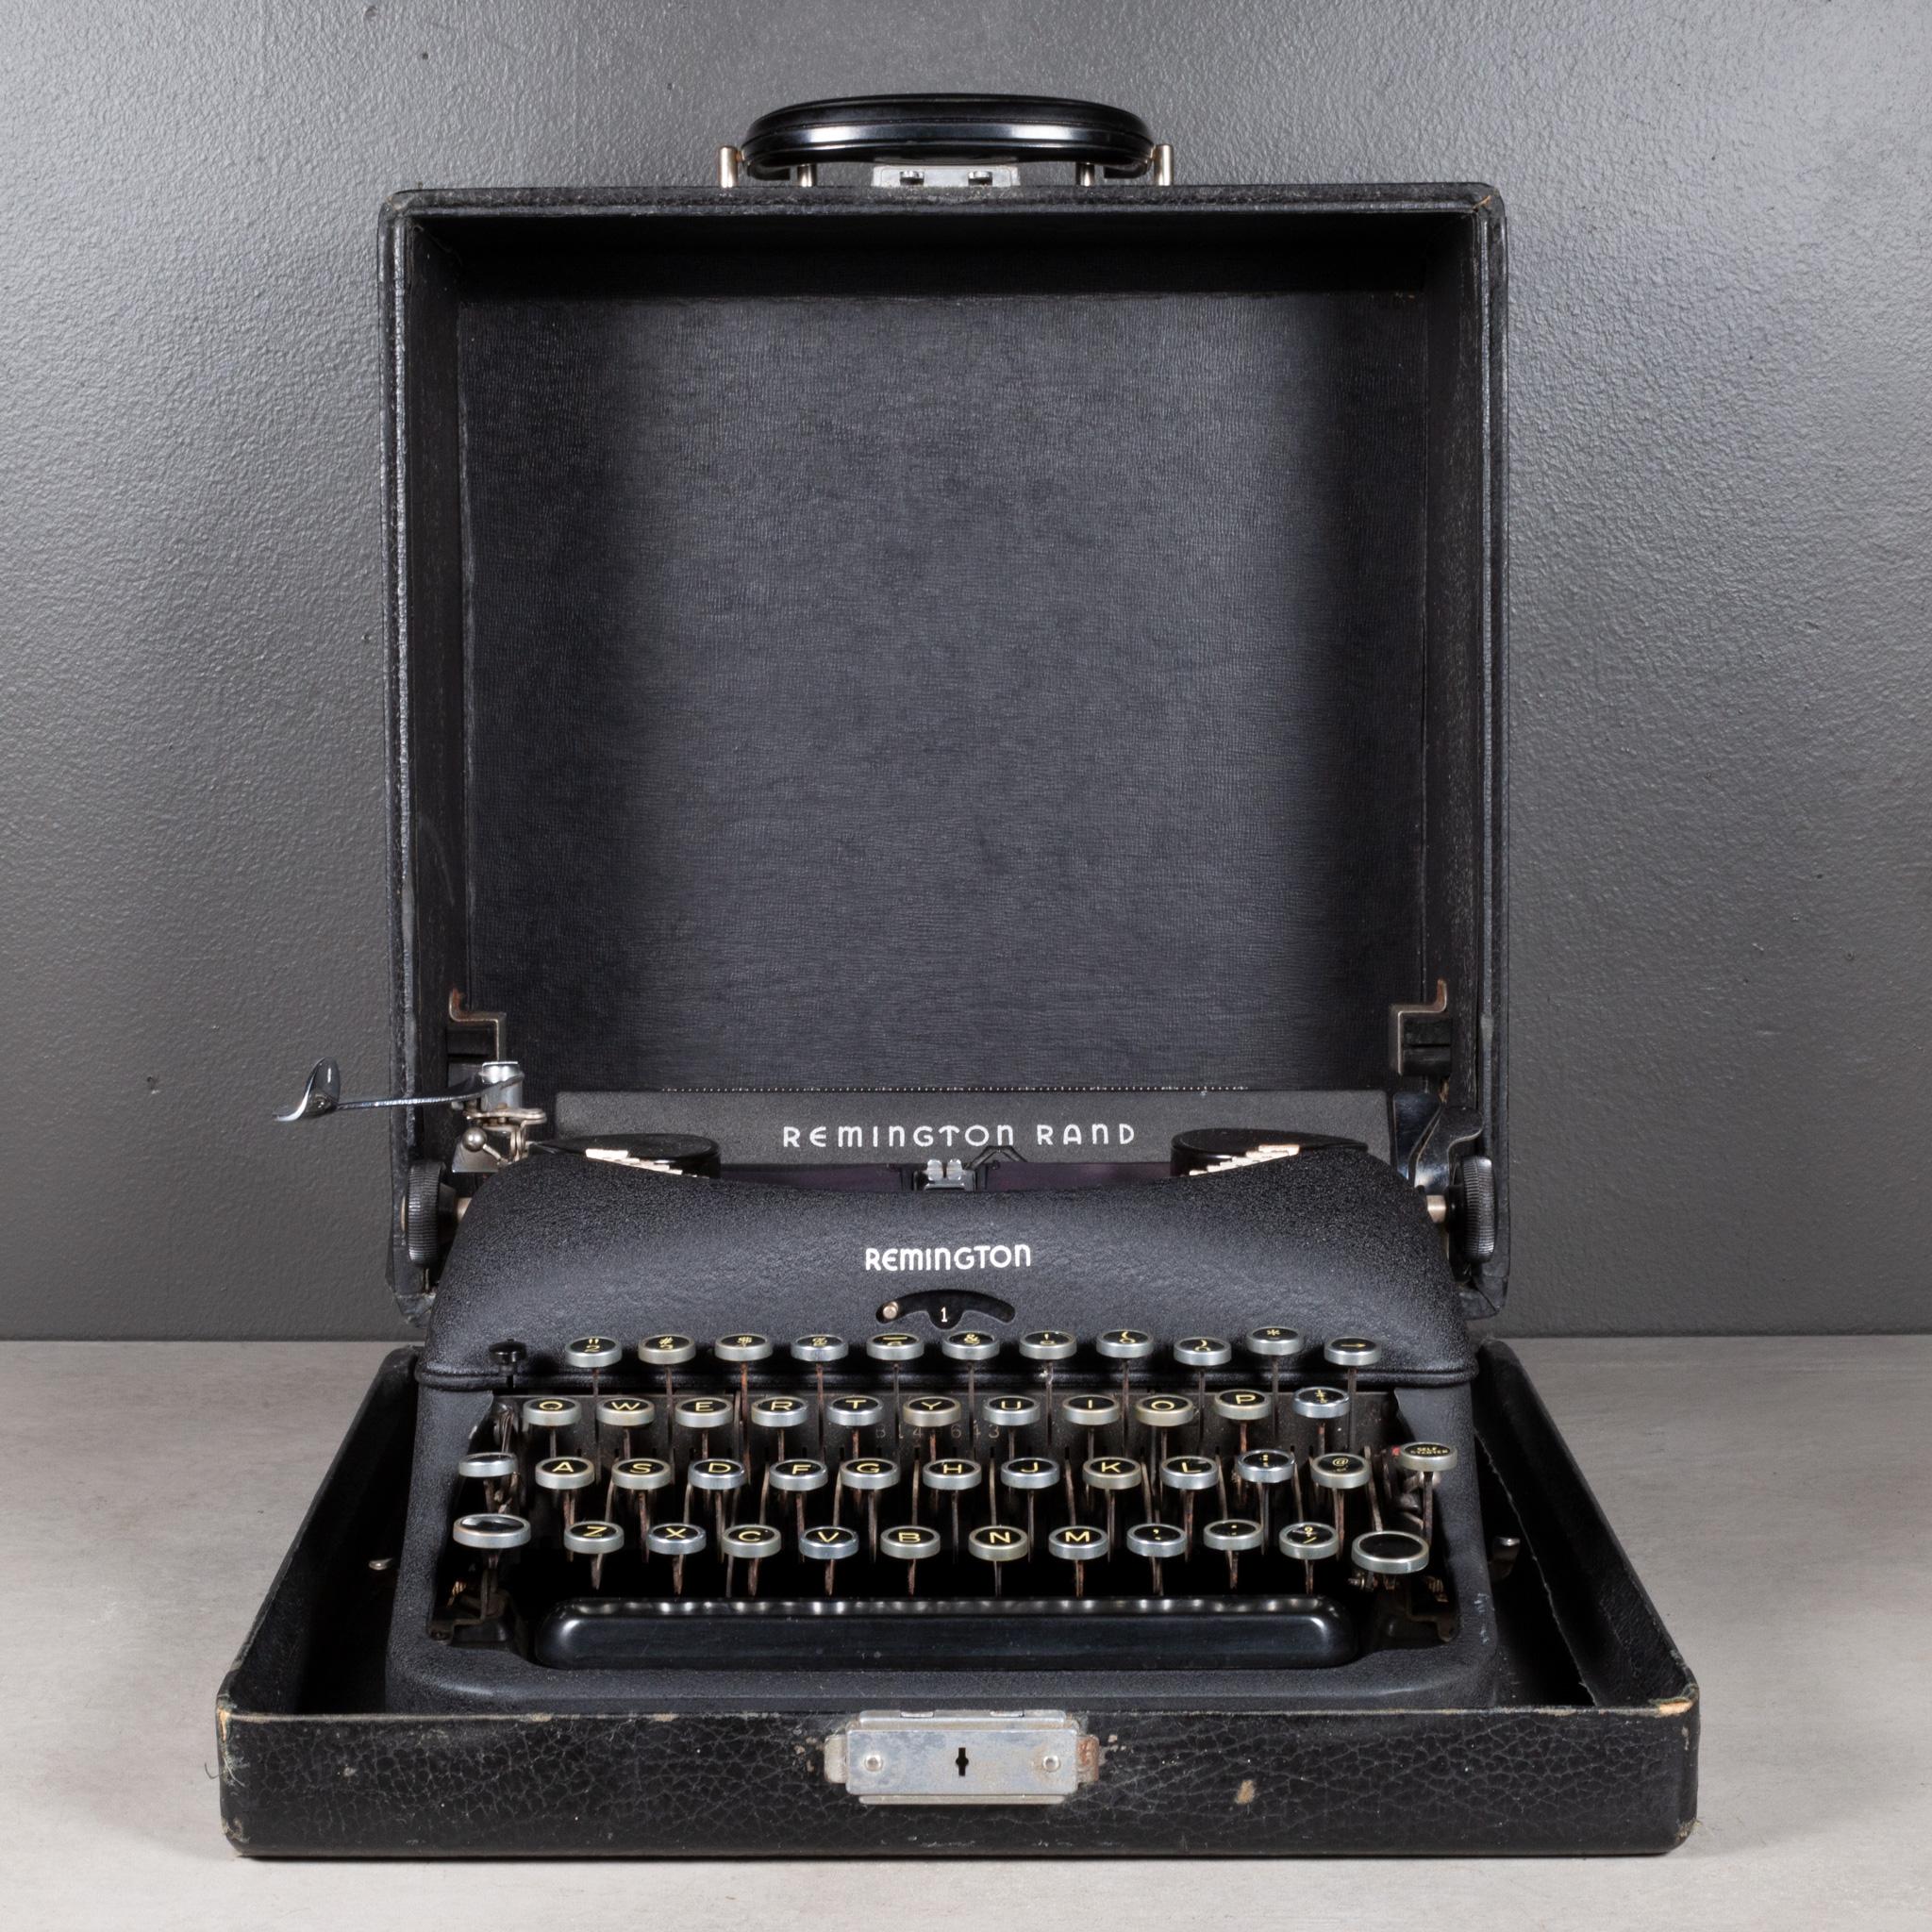 ABOUT

An original Remington Rand Deluxe Model 5 Typewriter with black, crinkle finish and original case. The keys are black with gold letters. This typewriter is very clean and works very well. It has smooth typing and the carriage advances and